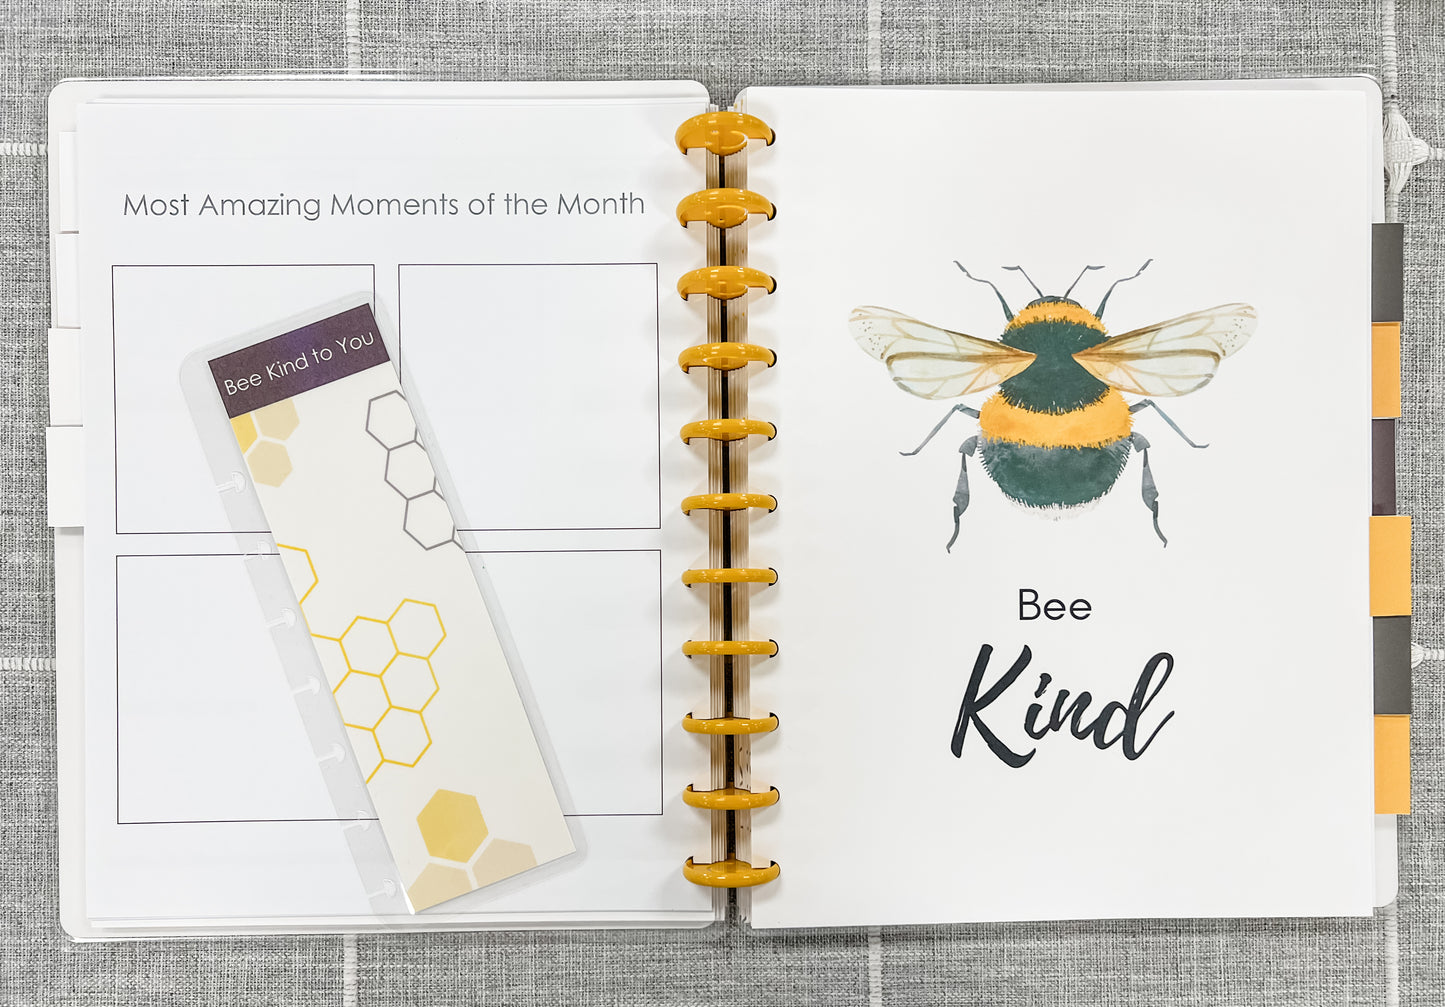 Undated Bee-YOU-tiful Monthly/Weekly Planner